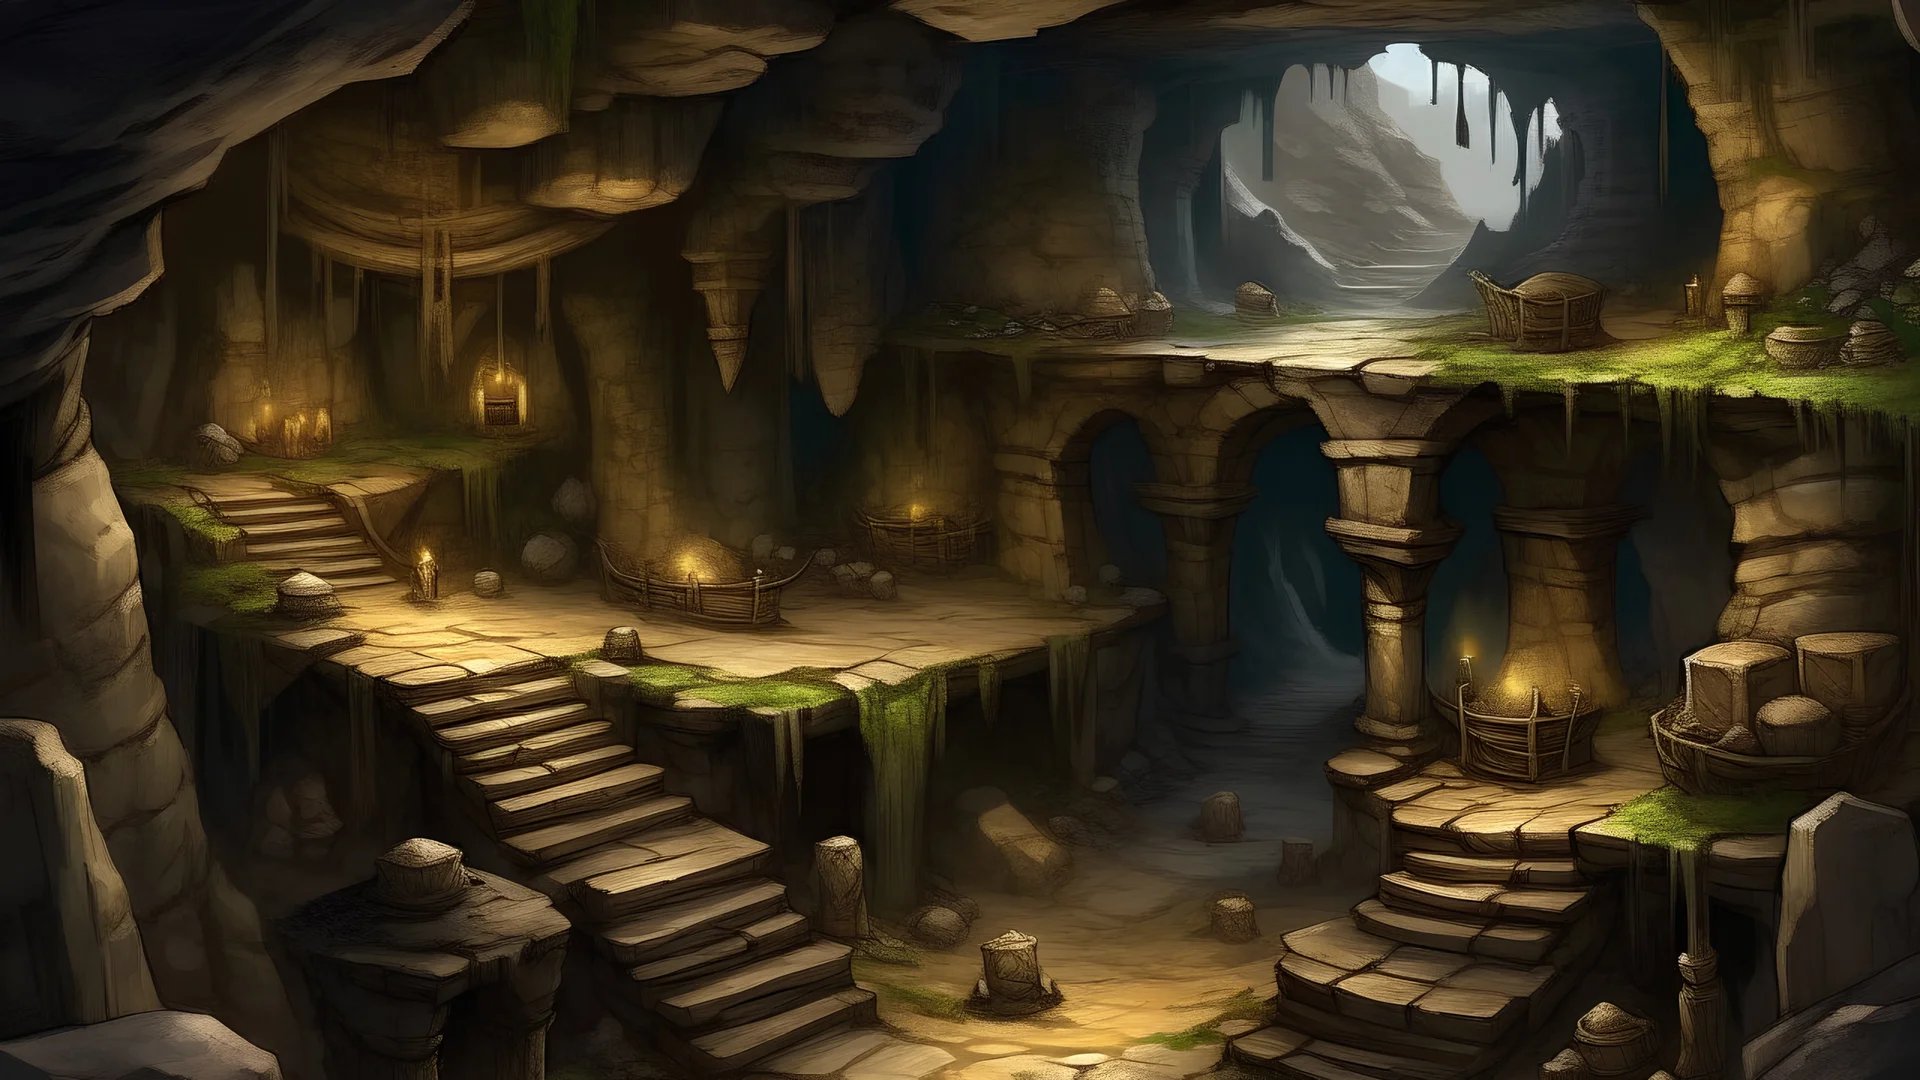 stony cavernous underground area where goblins could live but no goblins